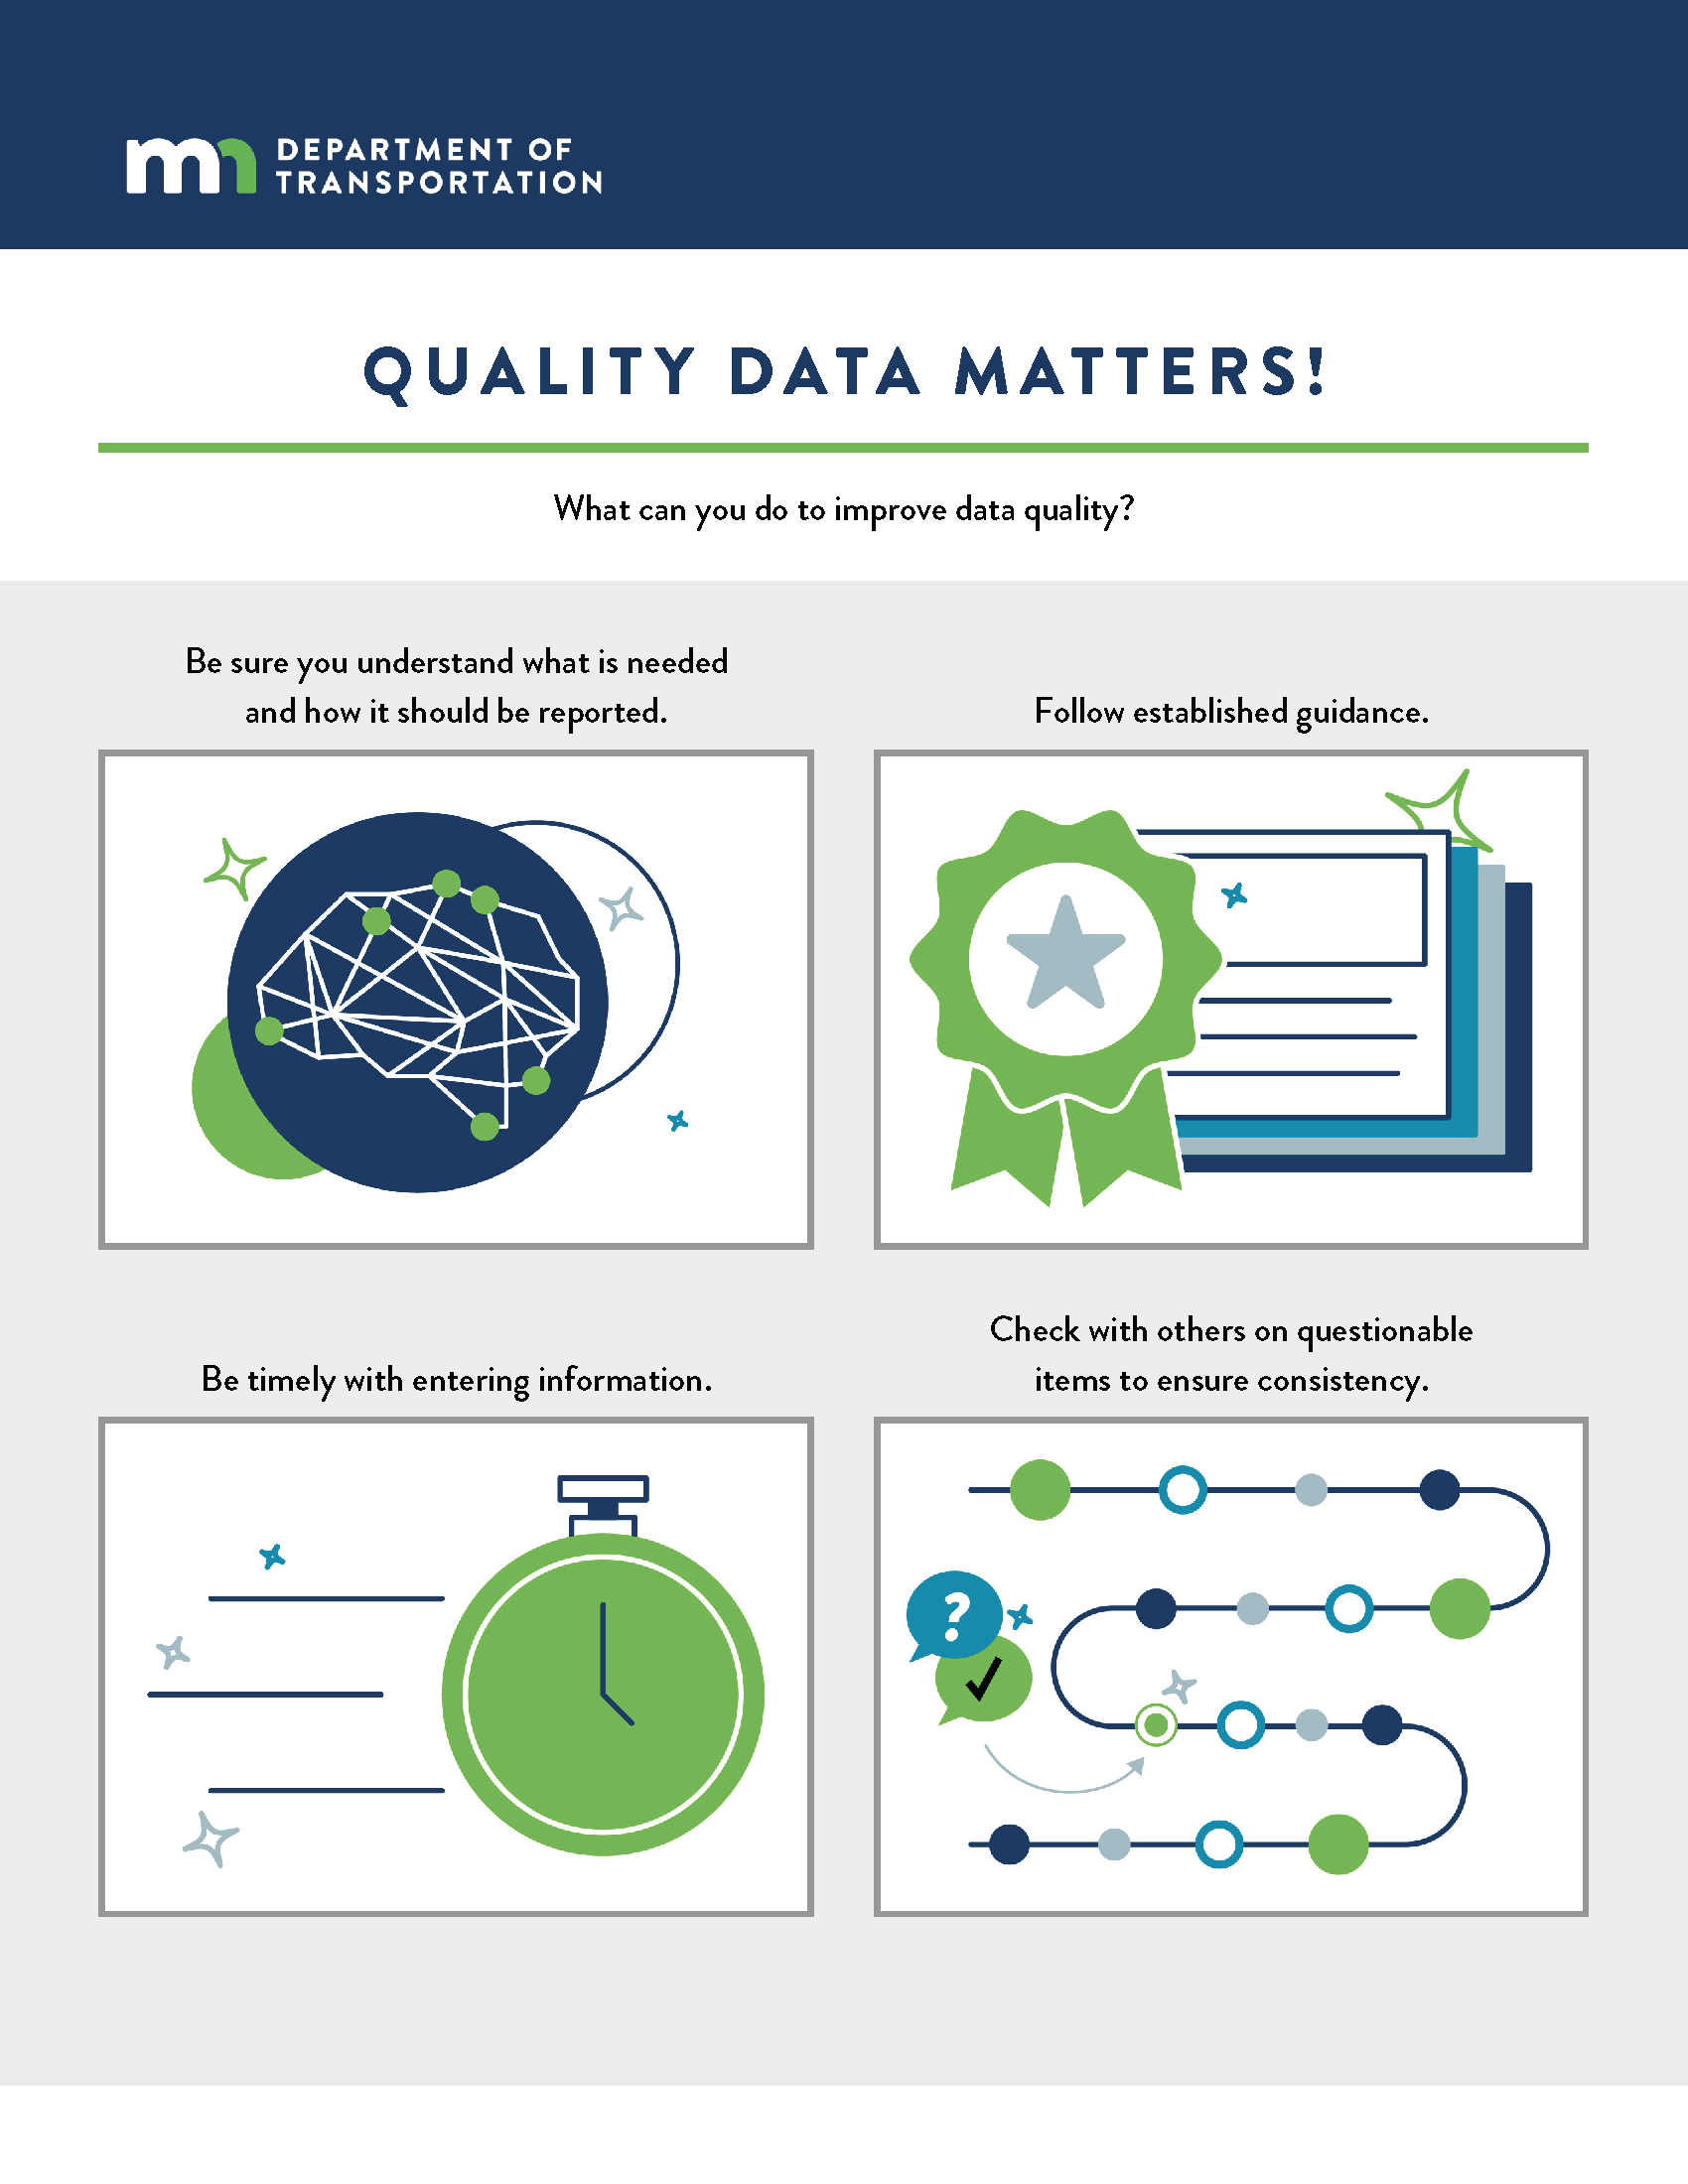 data quality matters a case study of obsolete comment detection